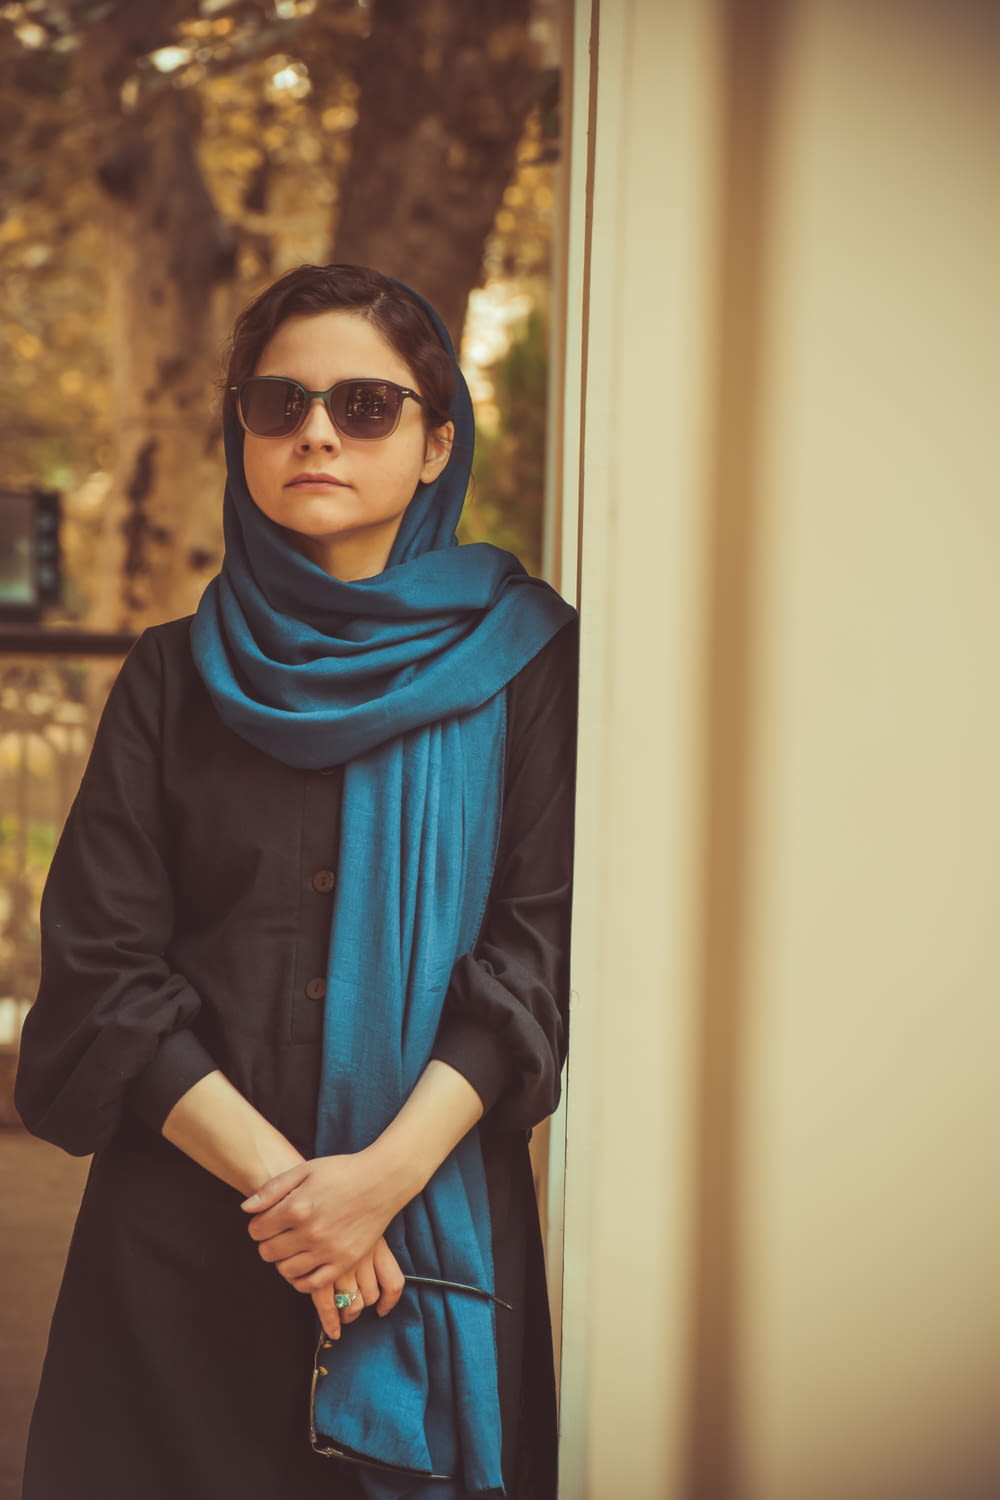 a person wearing sunglasses and a scarf